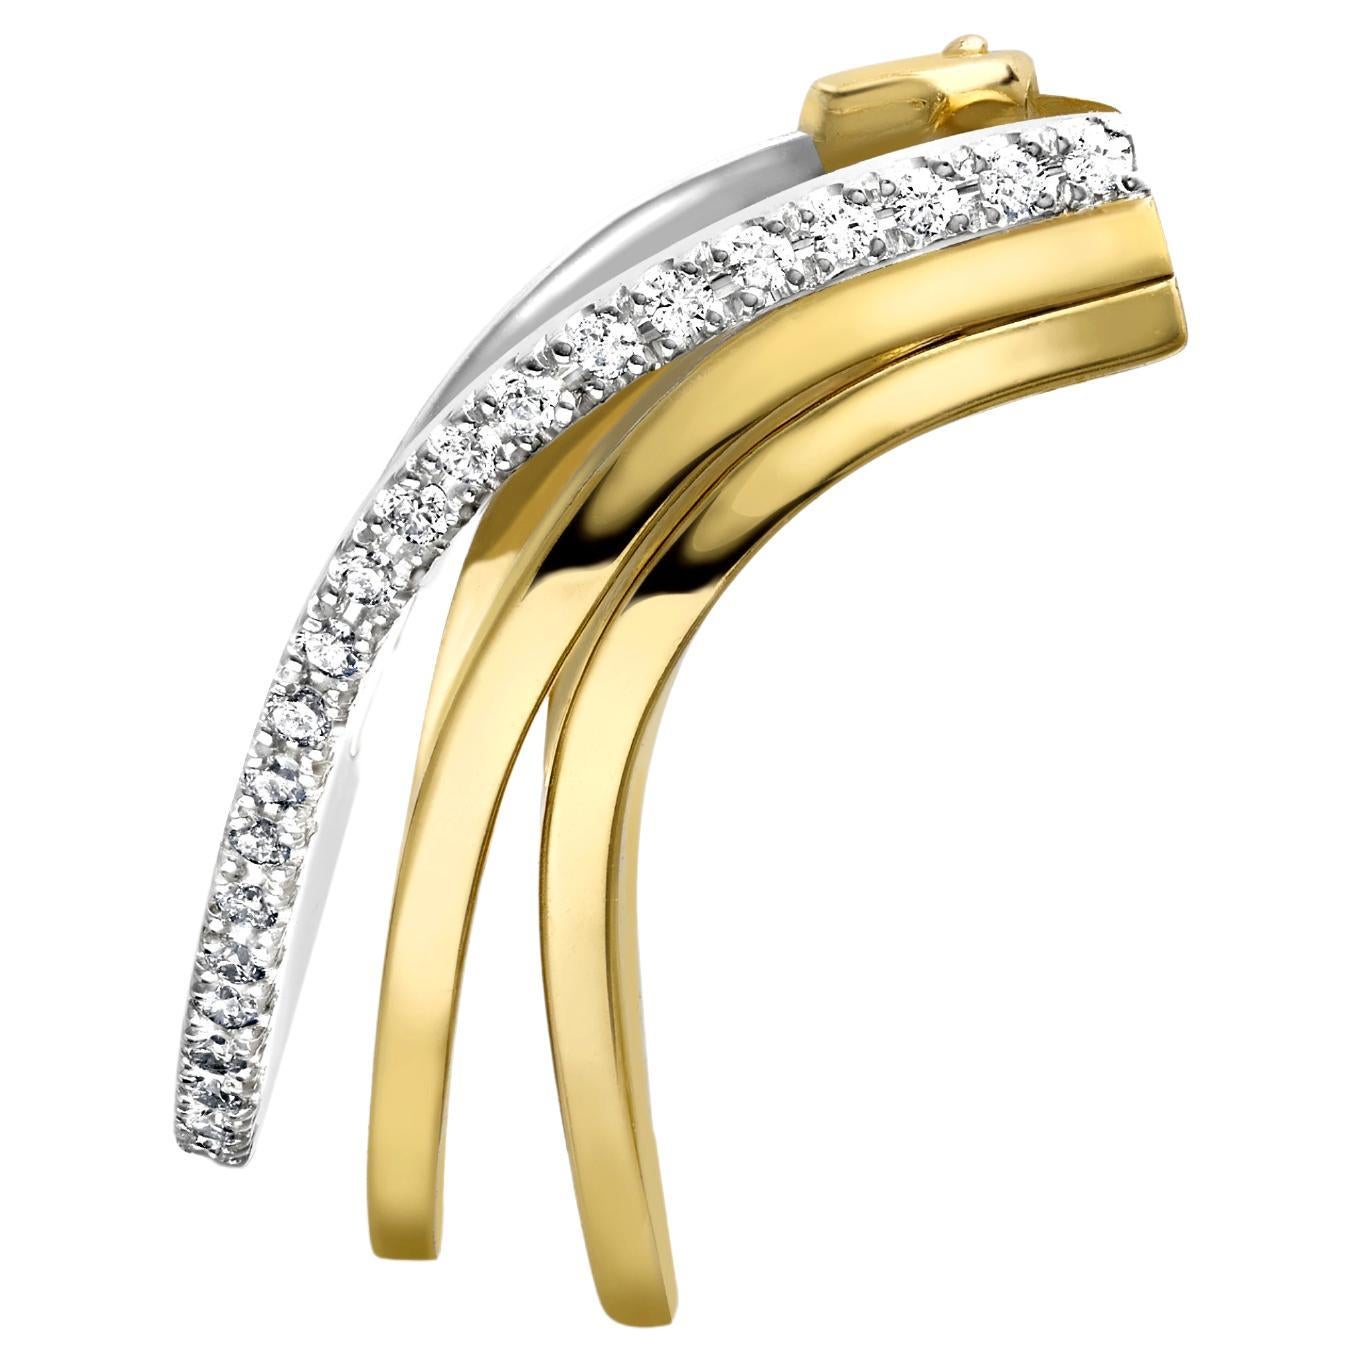 STRATUM EAR CUFF White and yellow gold with single diamond edge by Liv Luttrell For Sale